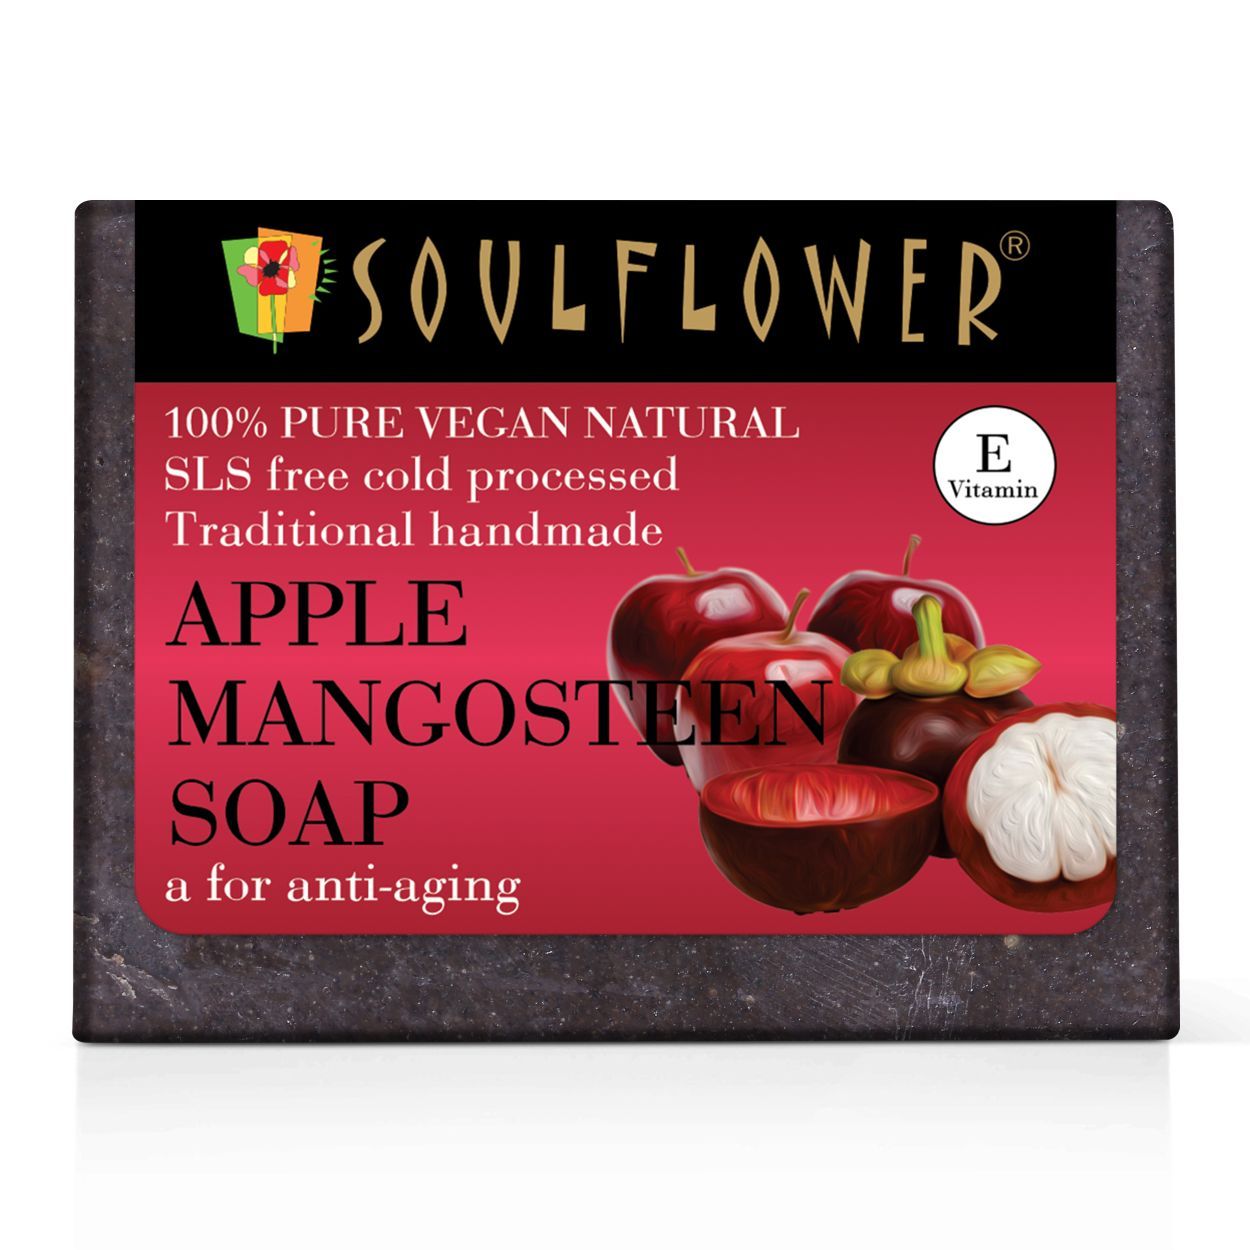 Soulflower Apple Mangosteen A For Anti-Aging Soap